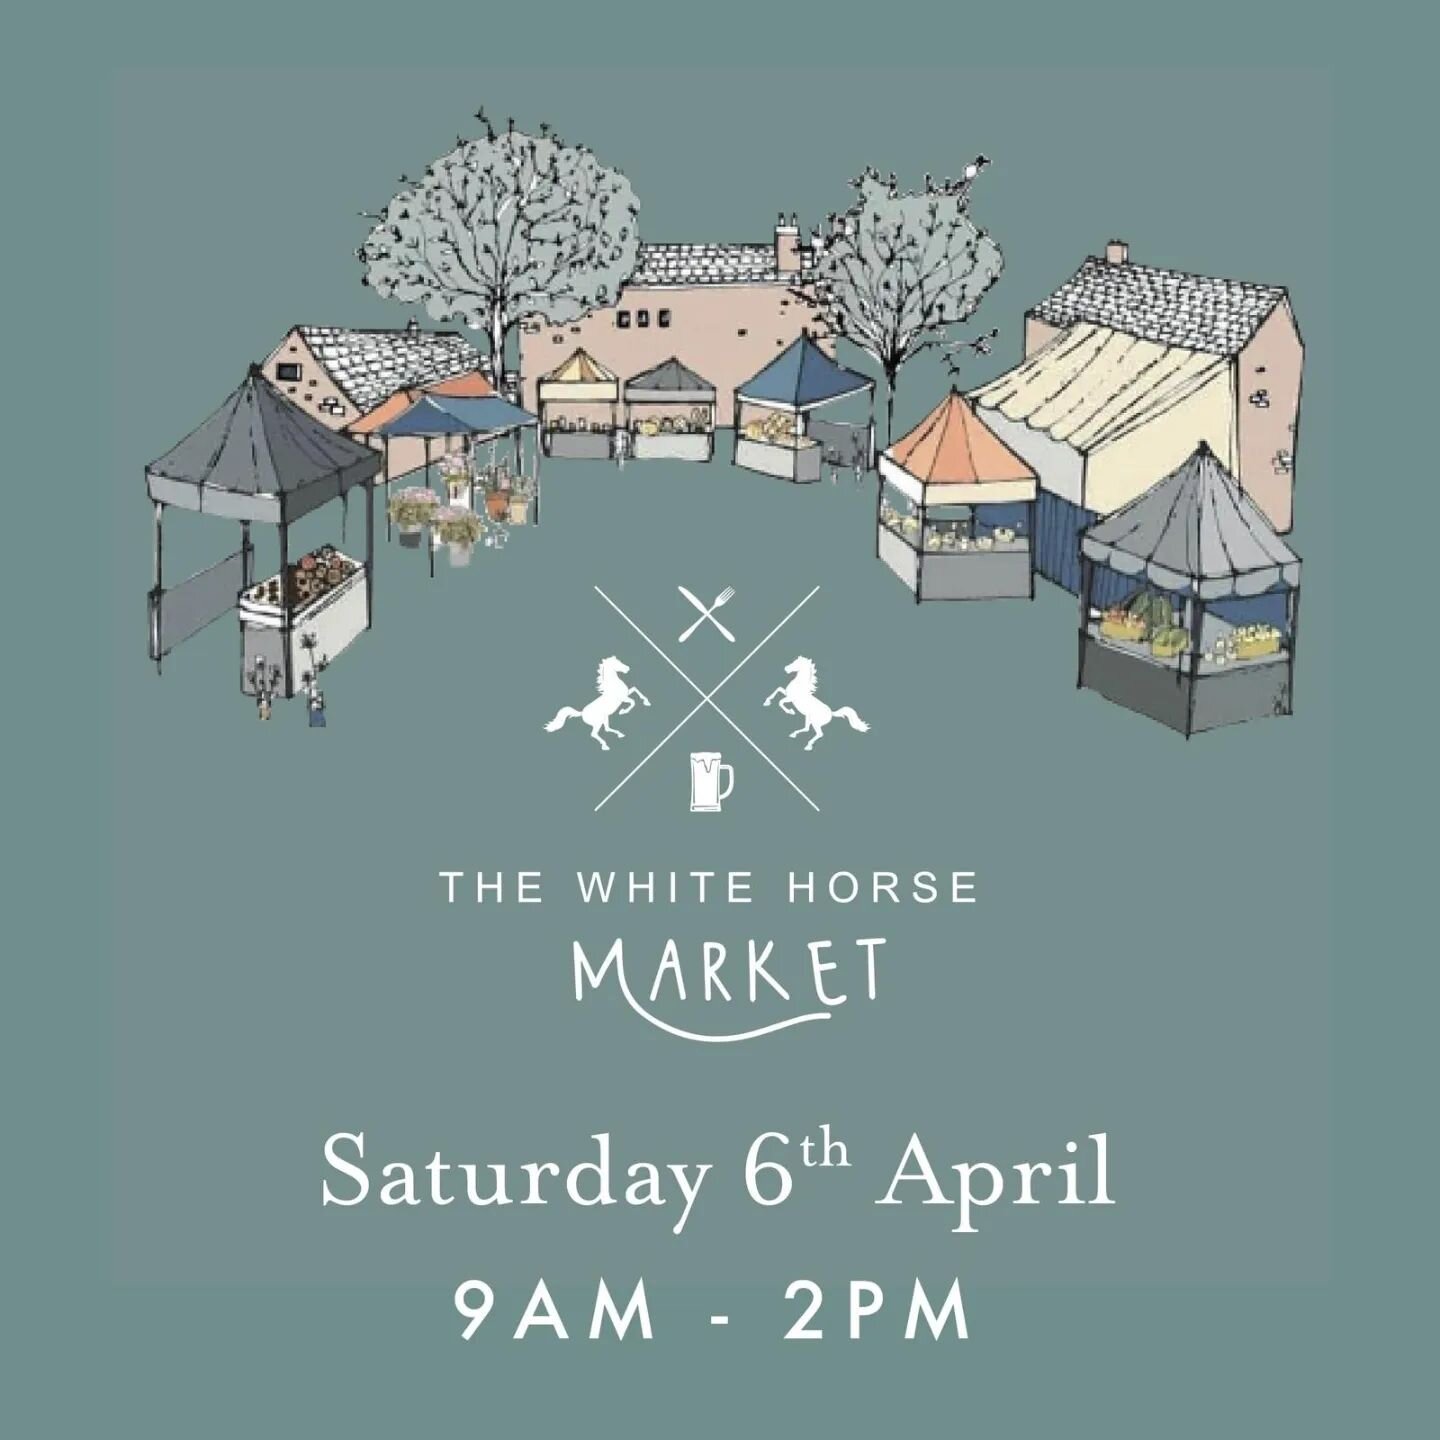 🐾THIS SATURDAY🐾
Catch me in the bright pink gazebo at @thewhitehorseruddington market 9am-2pm for the prettiest pet accessories in Nottingham!
All designed and sewn by me, all size dogs welcome from XS to XL! (Yes I do make collars to fit big dogs 